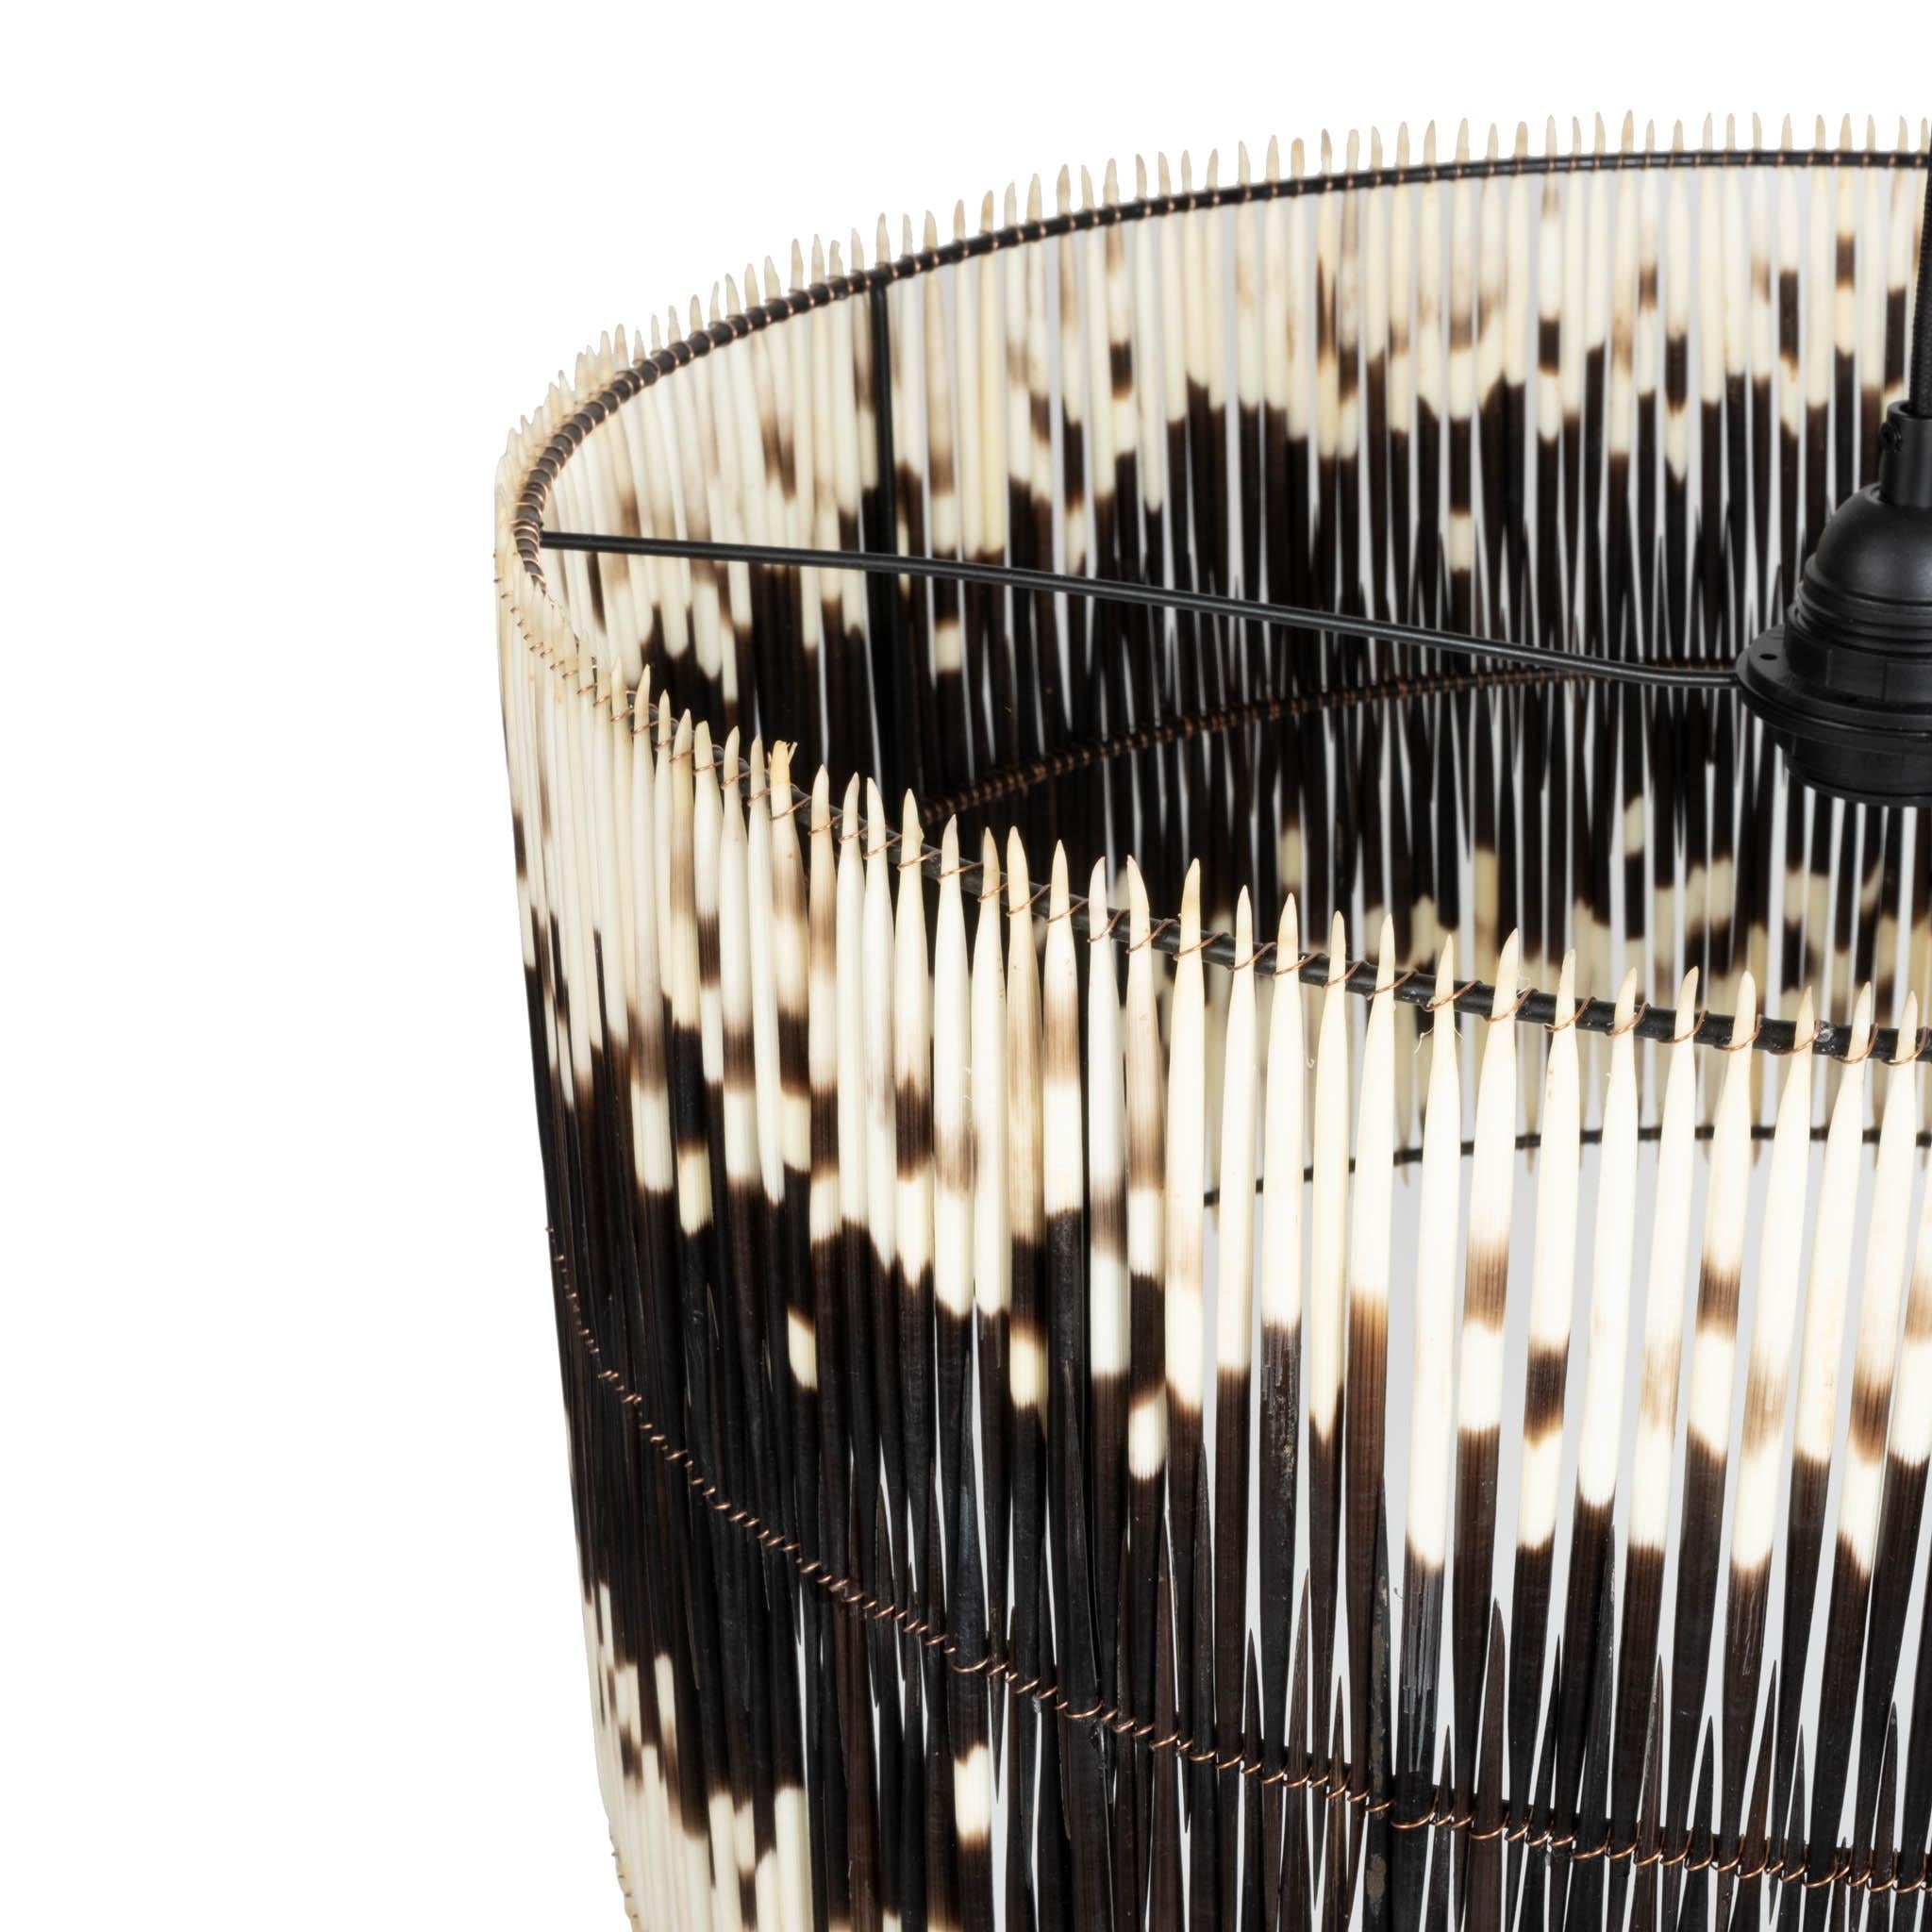 Sustainably sourced porcupine quills are bound together to create this light fixture's striking drum shade. Because of the organic nature of the materials, no two pendants are exactly alike.

PRODUCT INFORMATION
DIMENSIONS: 20